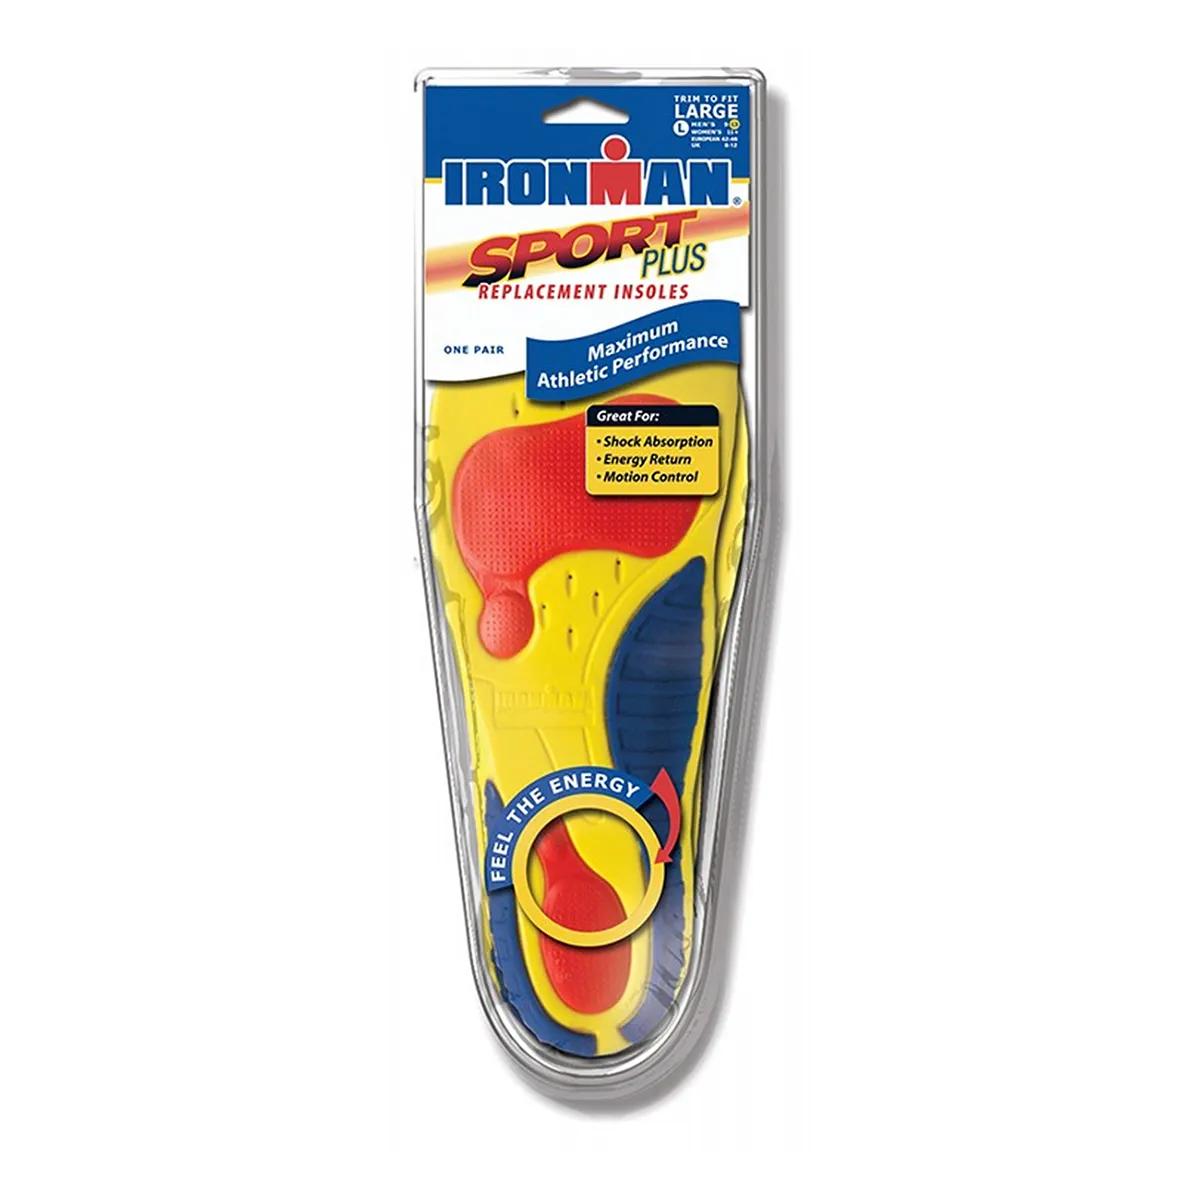 Brant SPORTS PLUS INSOLE TRIM TO FIT 